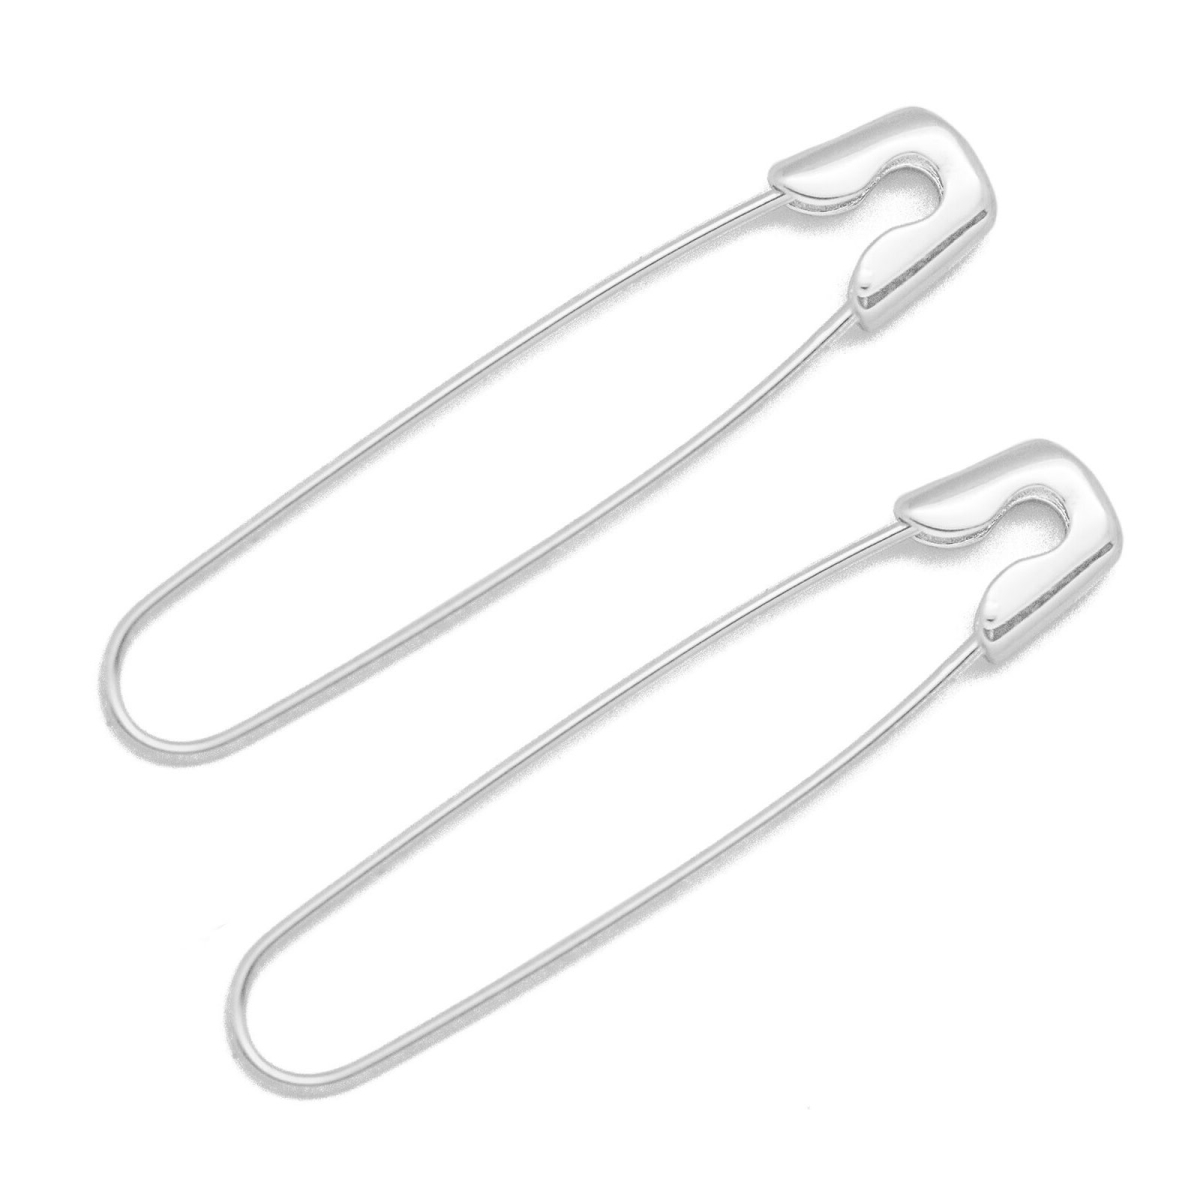 Hfyj-538204593821 Fashionable Simple Safety Pin 925 Sterling Silver Hoop Earrings